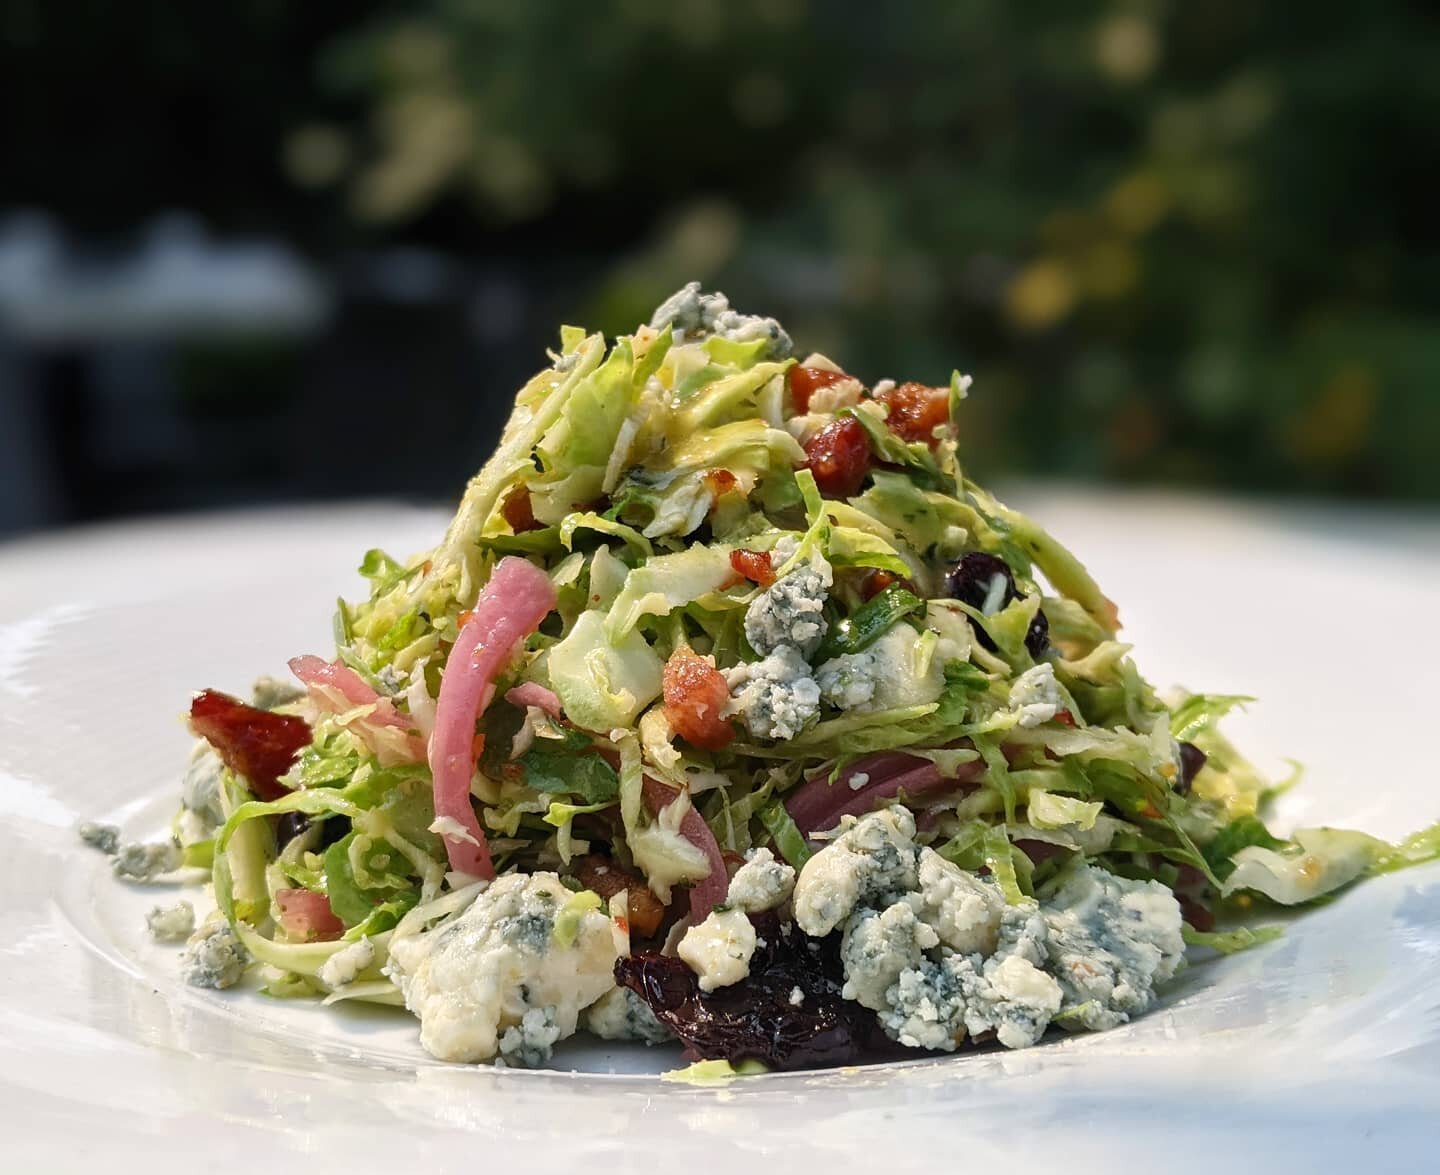 Shaved Brussels Sprouts Salad
&bull;
&bull;
#saladspecial #zackbruell #universitycircle #clefoodies #clefood #patioweather #outdoordining